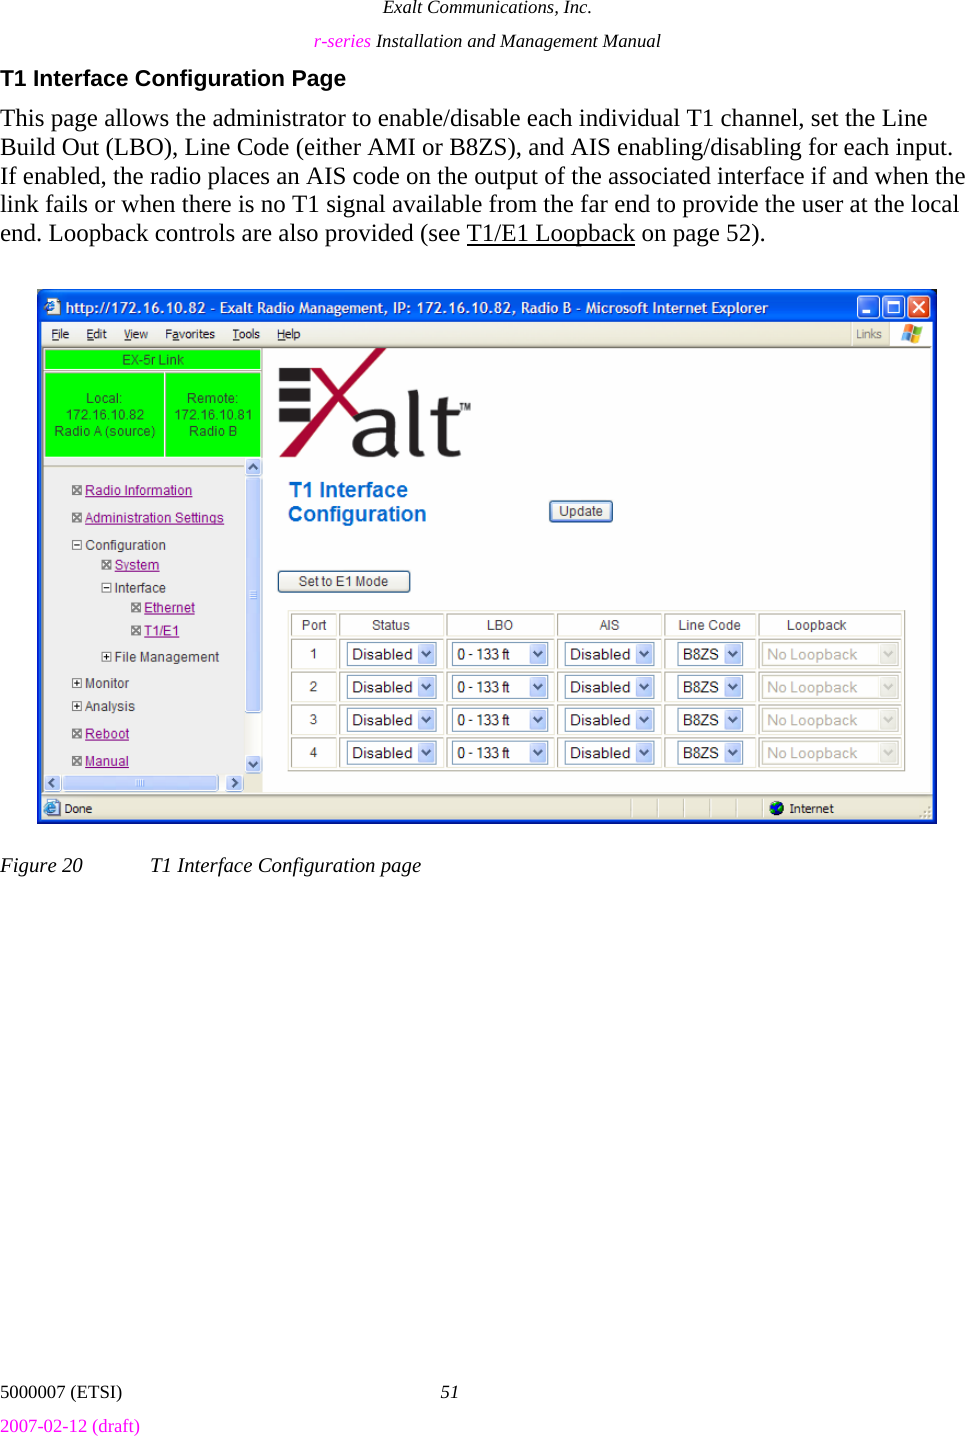 Exalt Communications, Inc. r-series Installation and Management Manual 5000007 (ETSI)  51 2007-02-12 (draft)  T1 Interface Configuration Page This page allows the administrator to enable/disable each individual T1 channel, set the Line Build Out (LBO), Line Code (either AMI or B8ZS), and AIS enabling/disabling for each input. If enabled, the radio places an AIS code on the output of the associated interface if and when the link fails or when there is no T1 signal available from the far end to provide the user at the local end. Loopback controls are also provided (see T1/E1 Loopback on page 52). Figure 20  T1 Interface Configuration page 